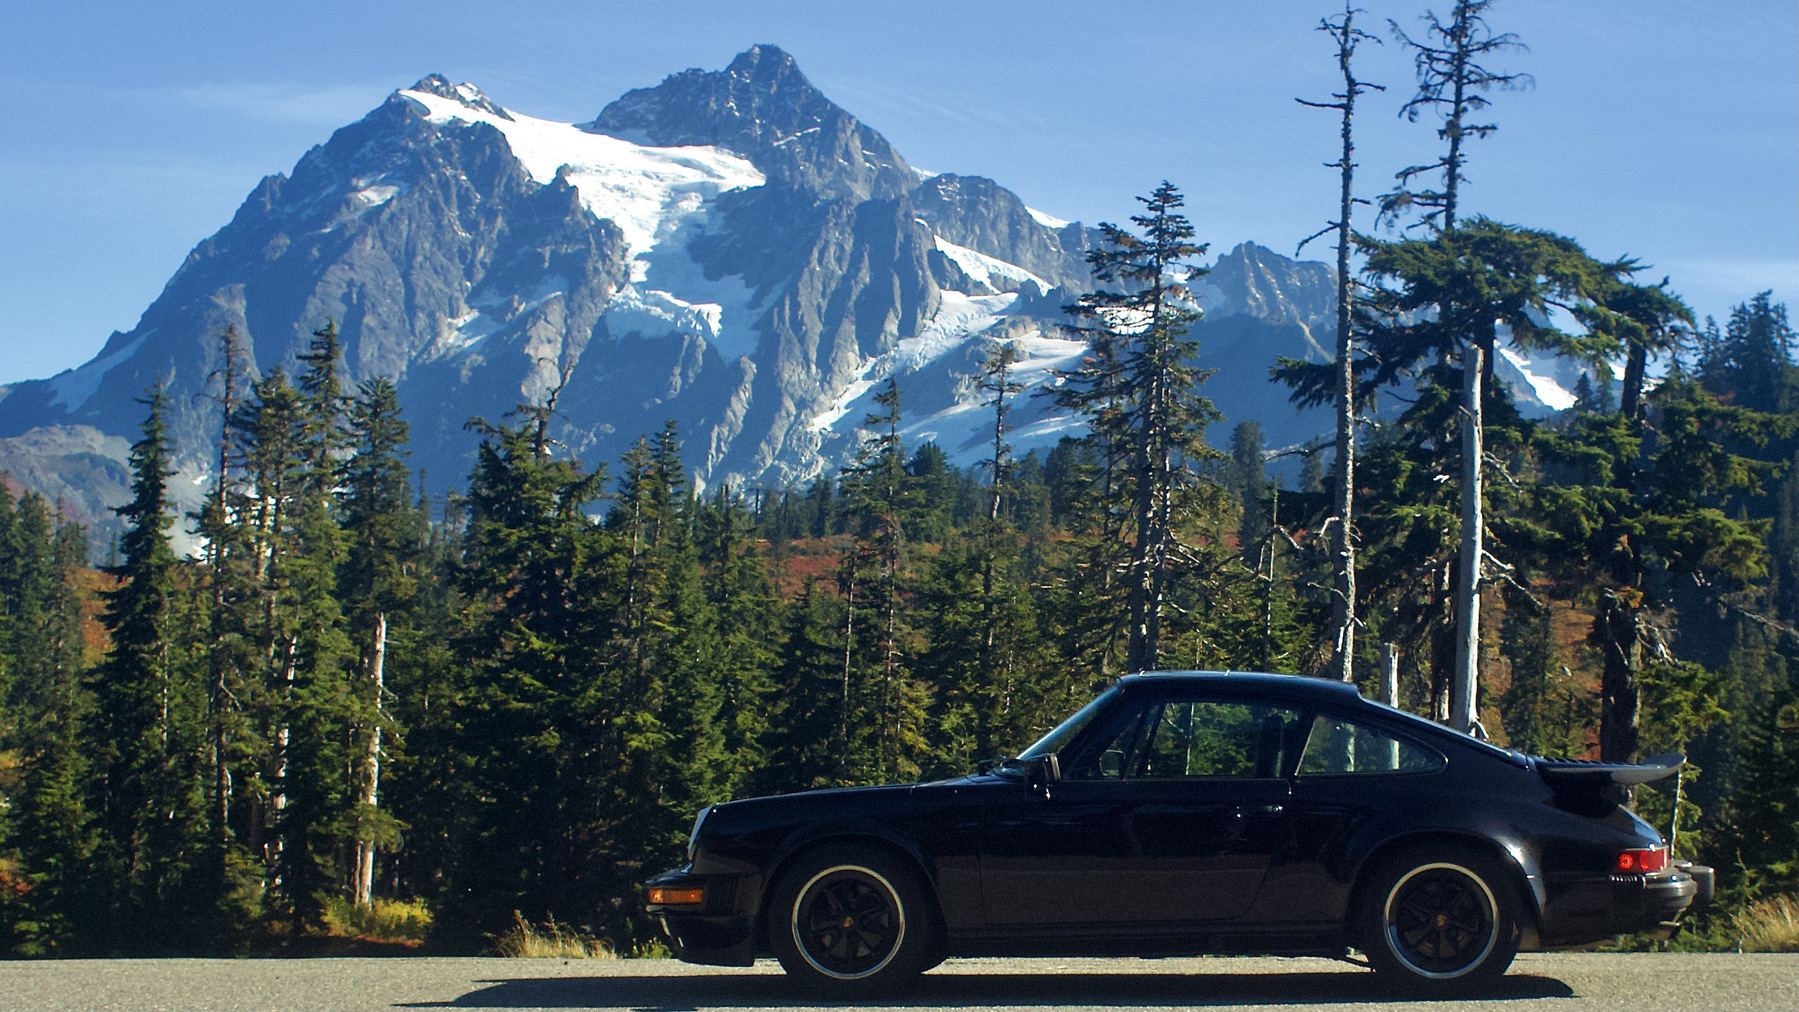 A black vintage 911 in front of a dramatic mountain vista